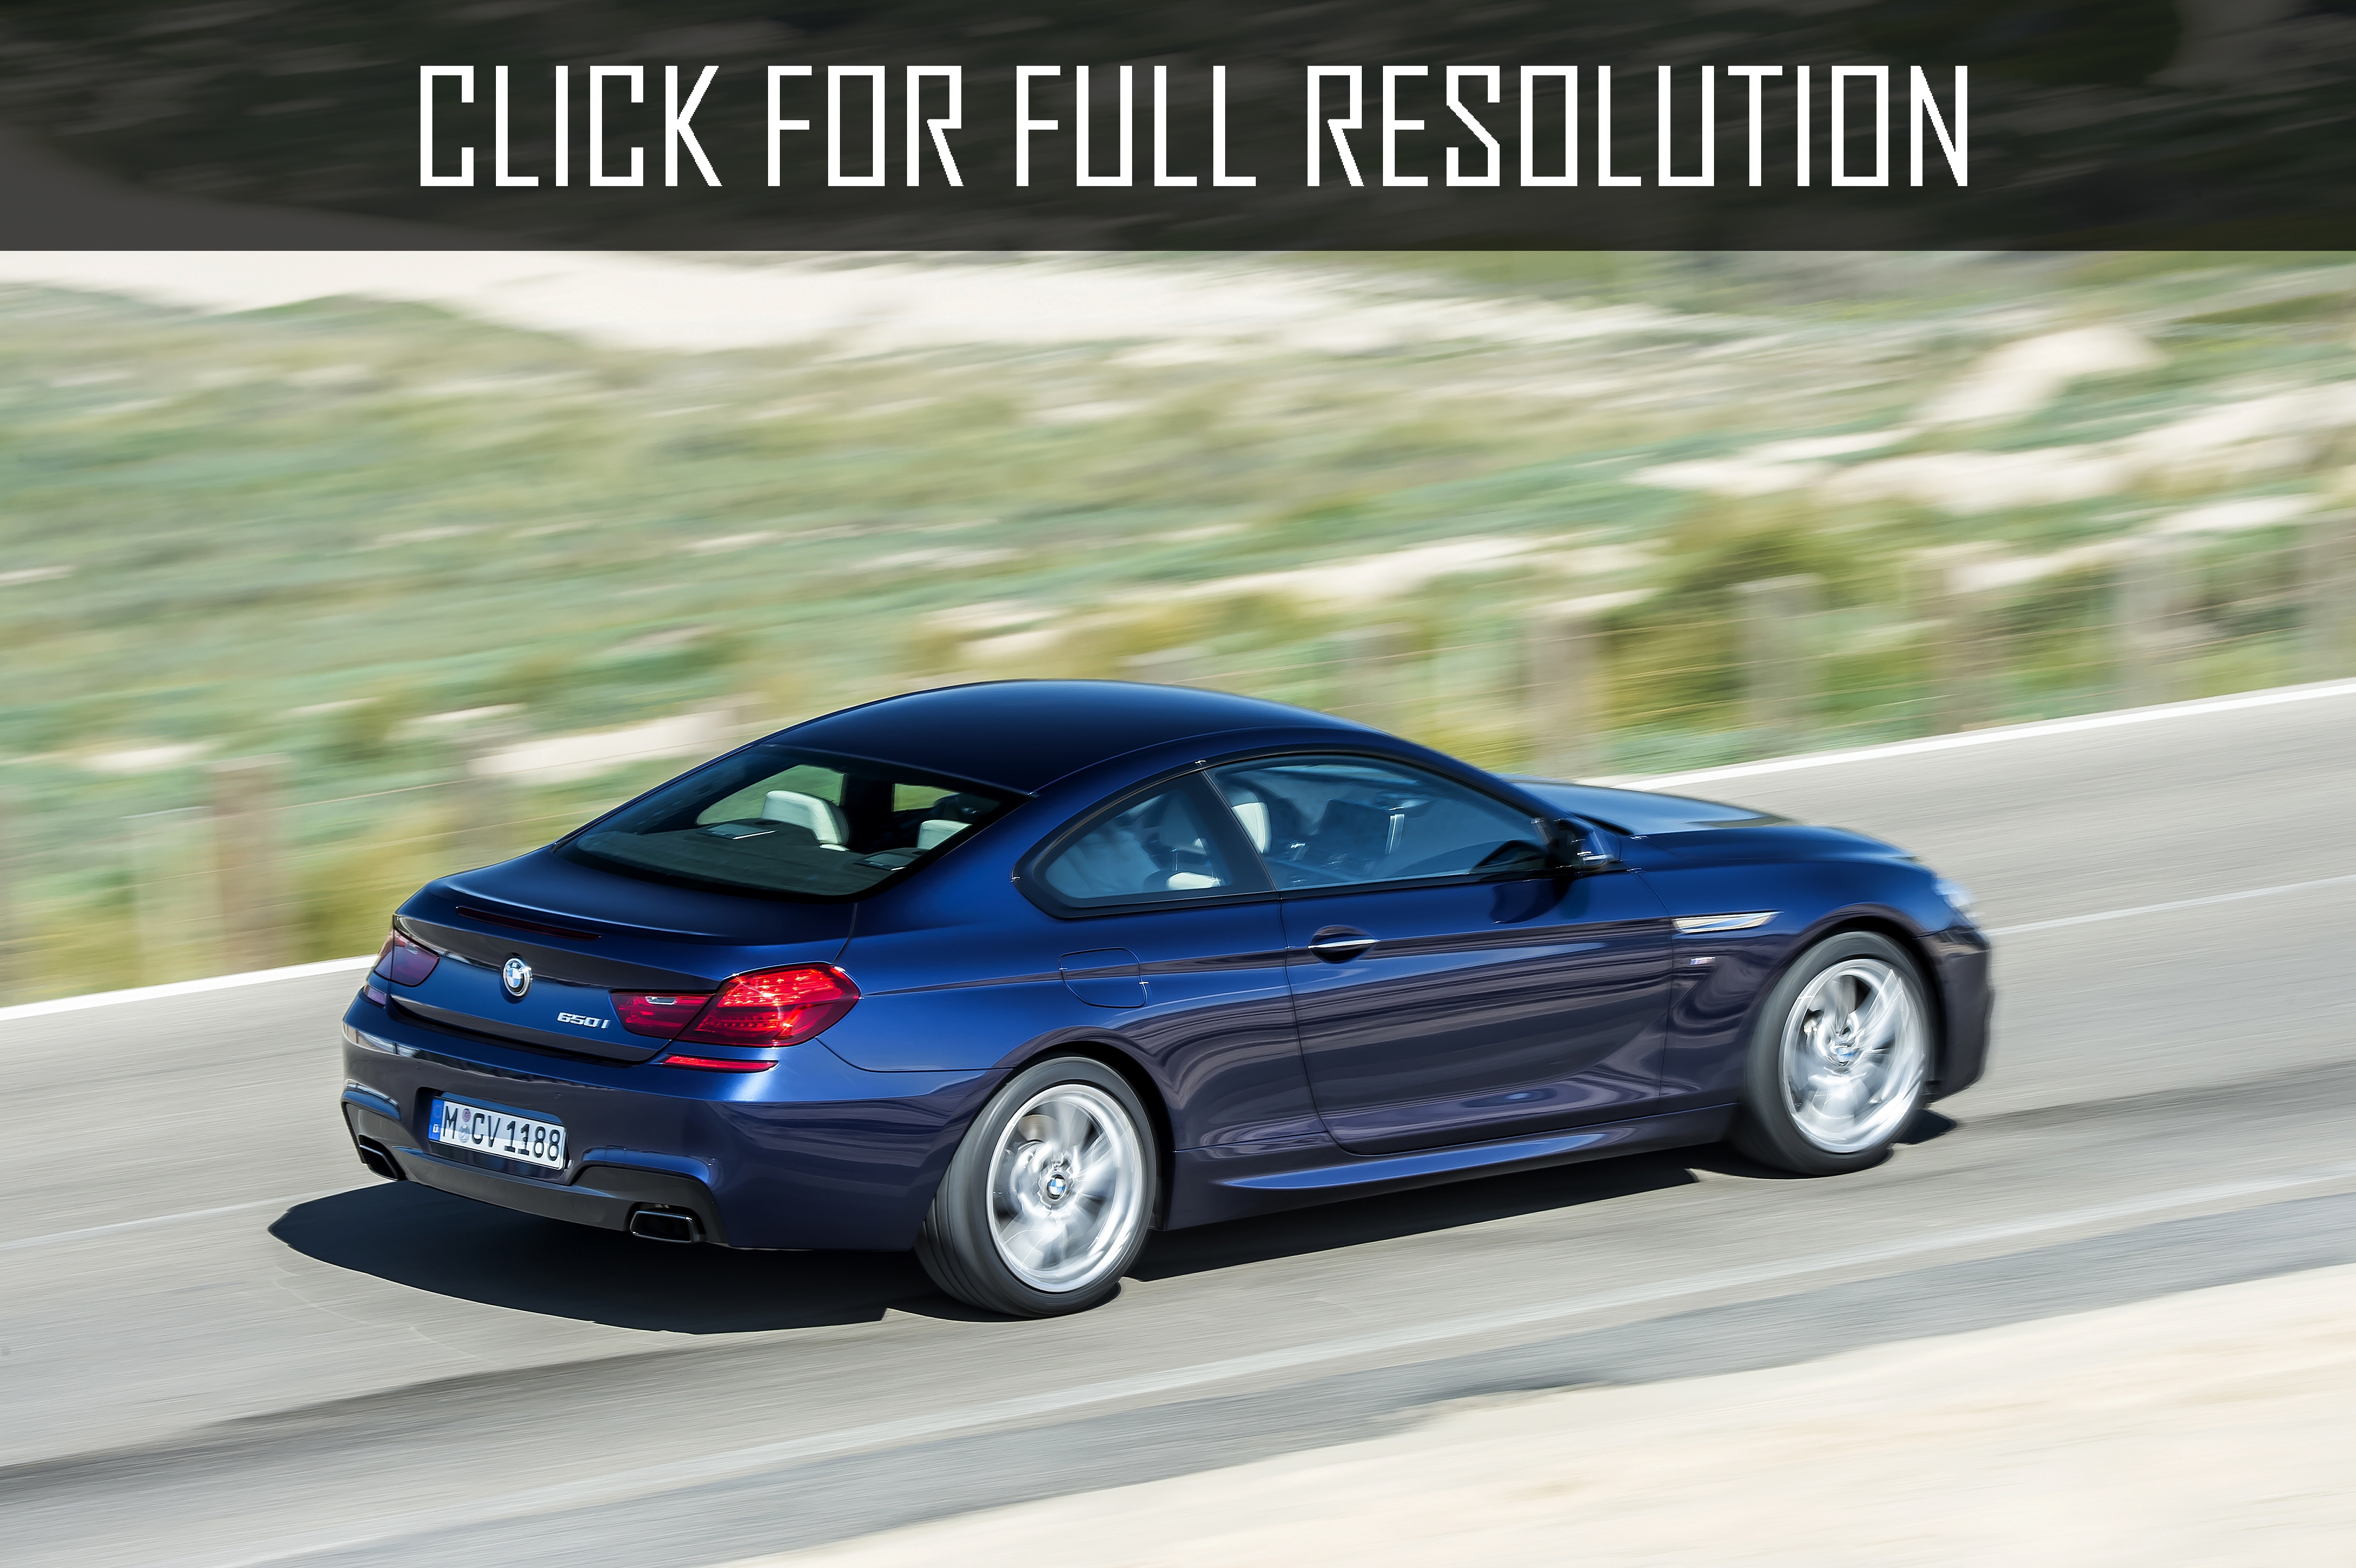 Bmw 6 Series Hardtop Convertible For Sale